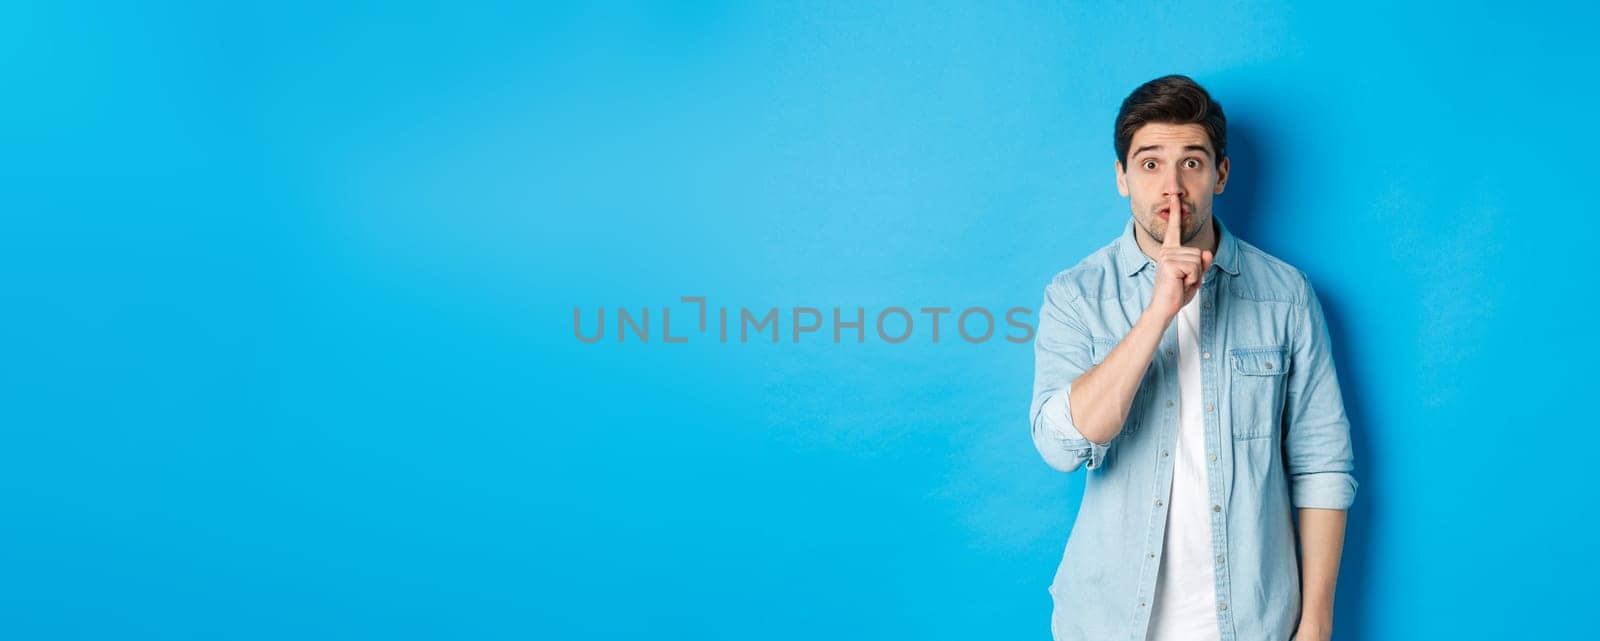 Portrait of excited man asking to keep quiet, showing hush taboo sign and looking nervously at camera, standing against blue background.